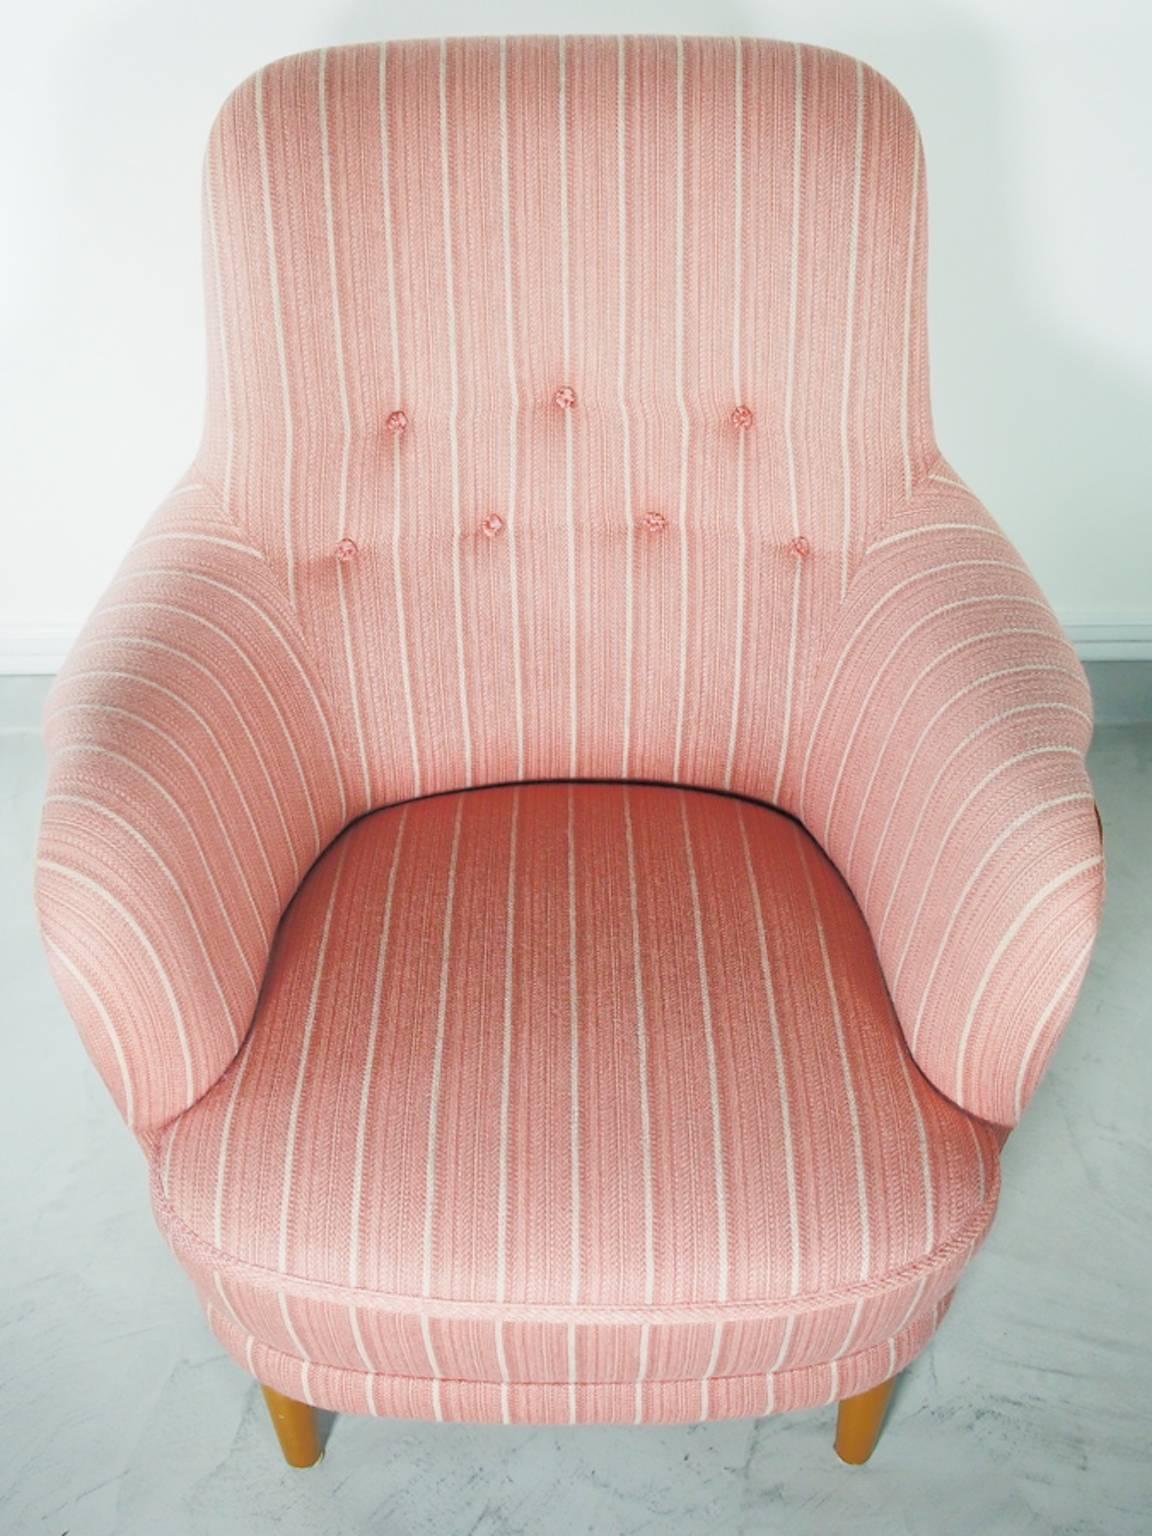 Samsas armchair designed by Carl Malmsten and produced by O.H. Sjörgen in Sweden in the 1960s. Professionally cleaned original pink and white striped wool upholstery. Stained beech legs. Matching three-seat sofa also available.